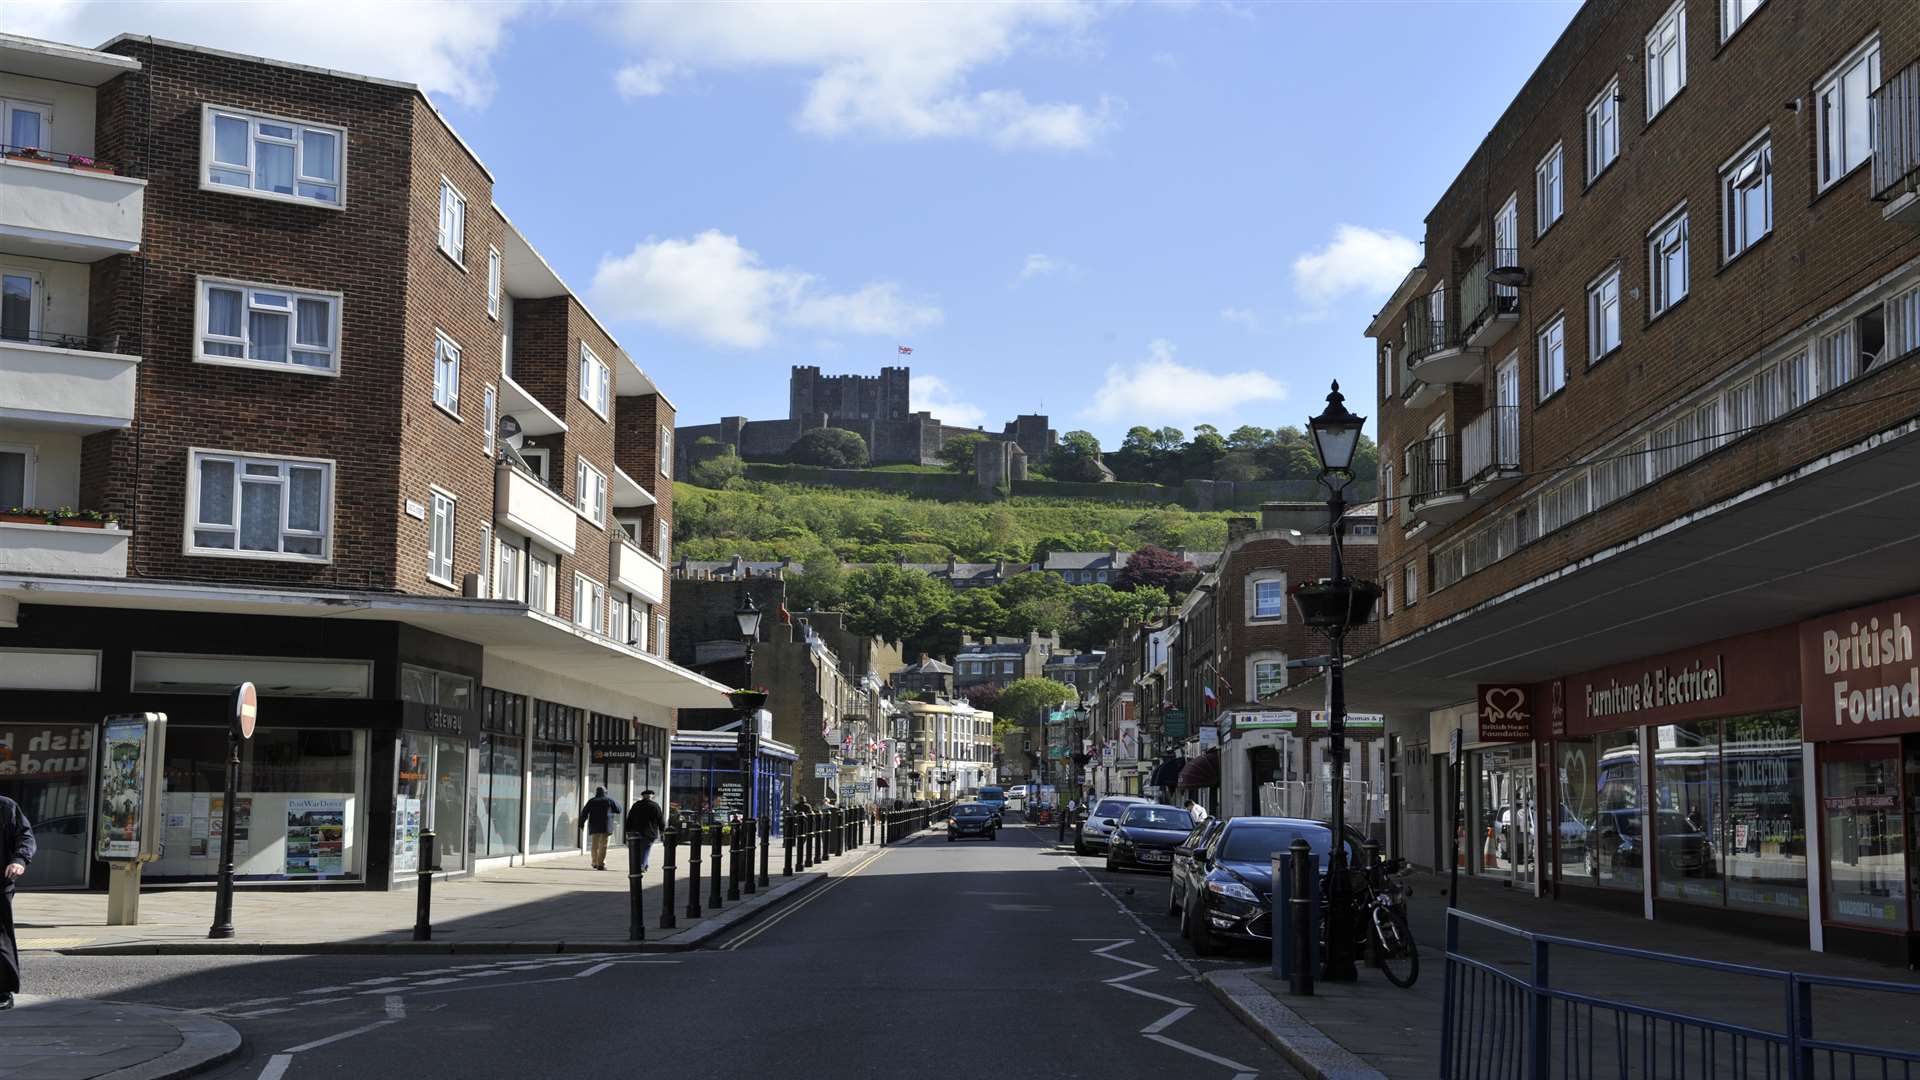 Dover has been listed as the 10th worst place to live in England